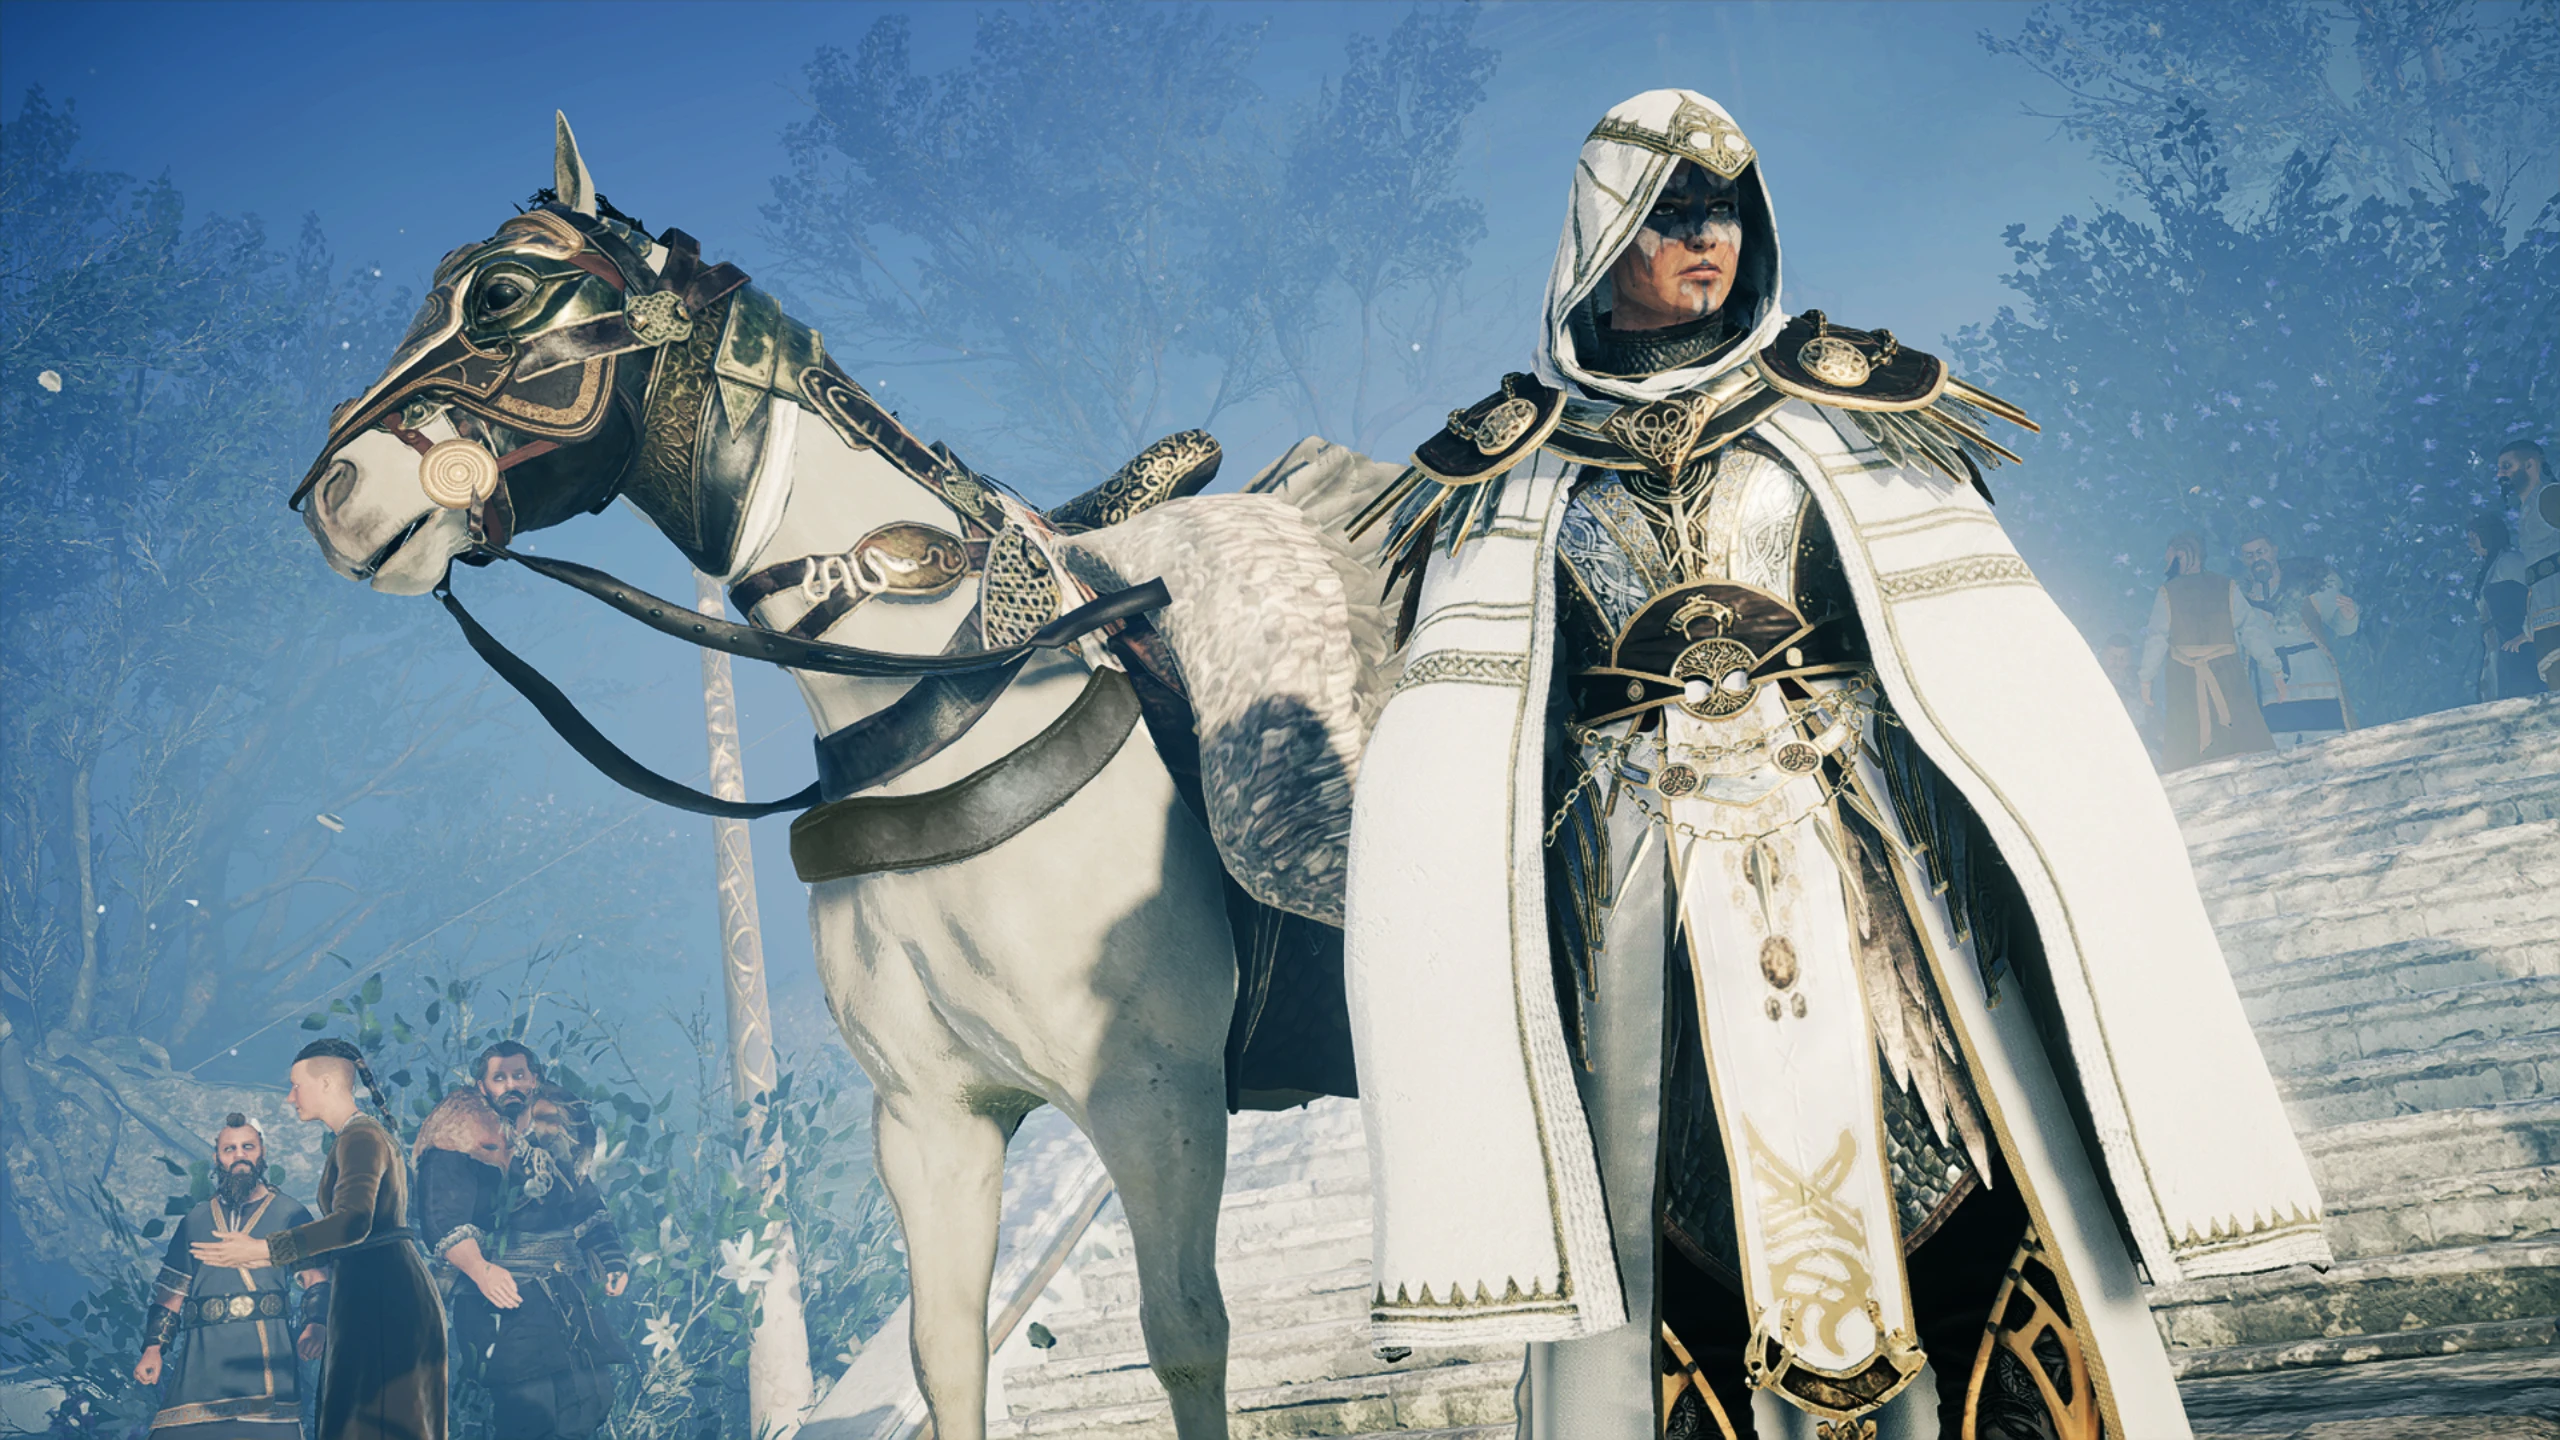 Top mods at Assassin's Creed Valhalla Nexus - Mods and community